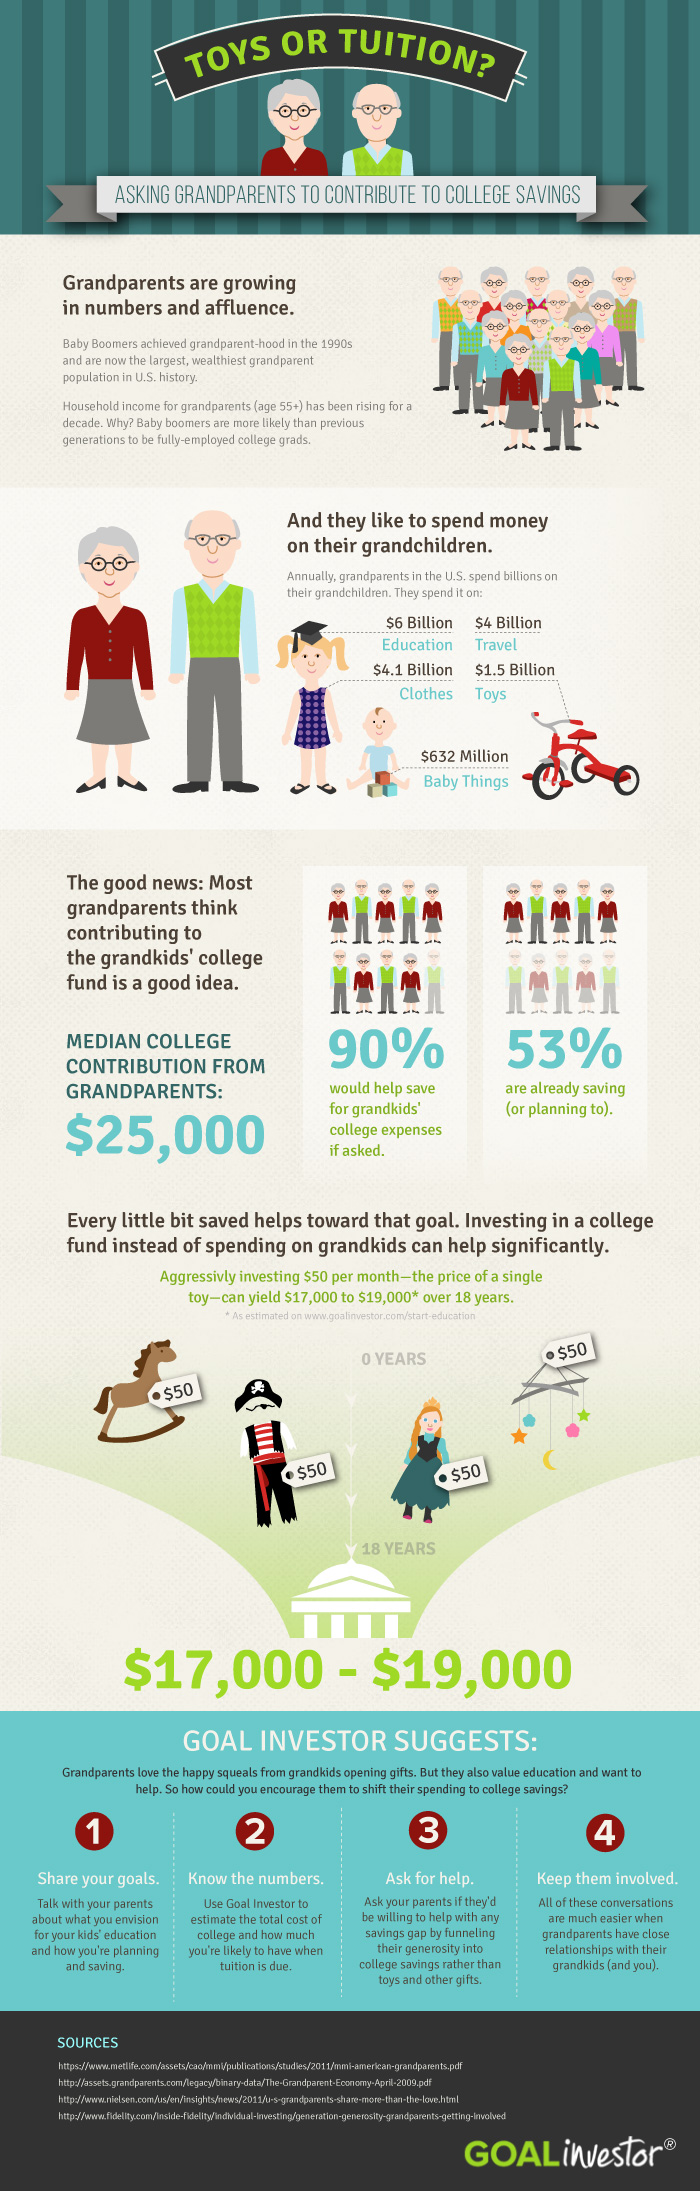 Toys or Tuition Infographic